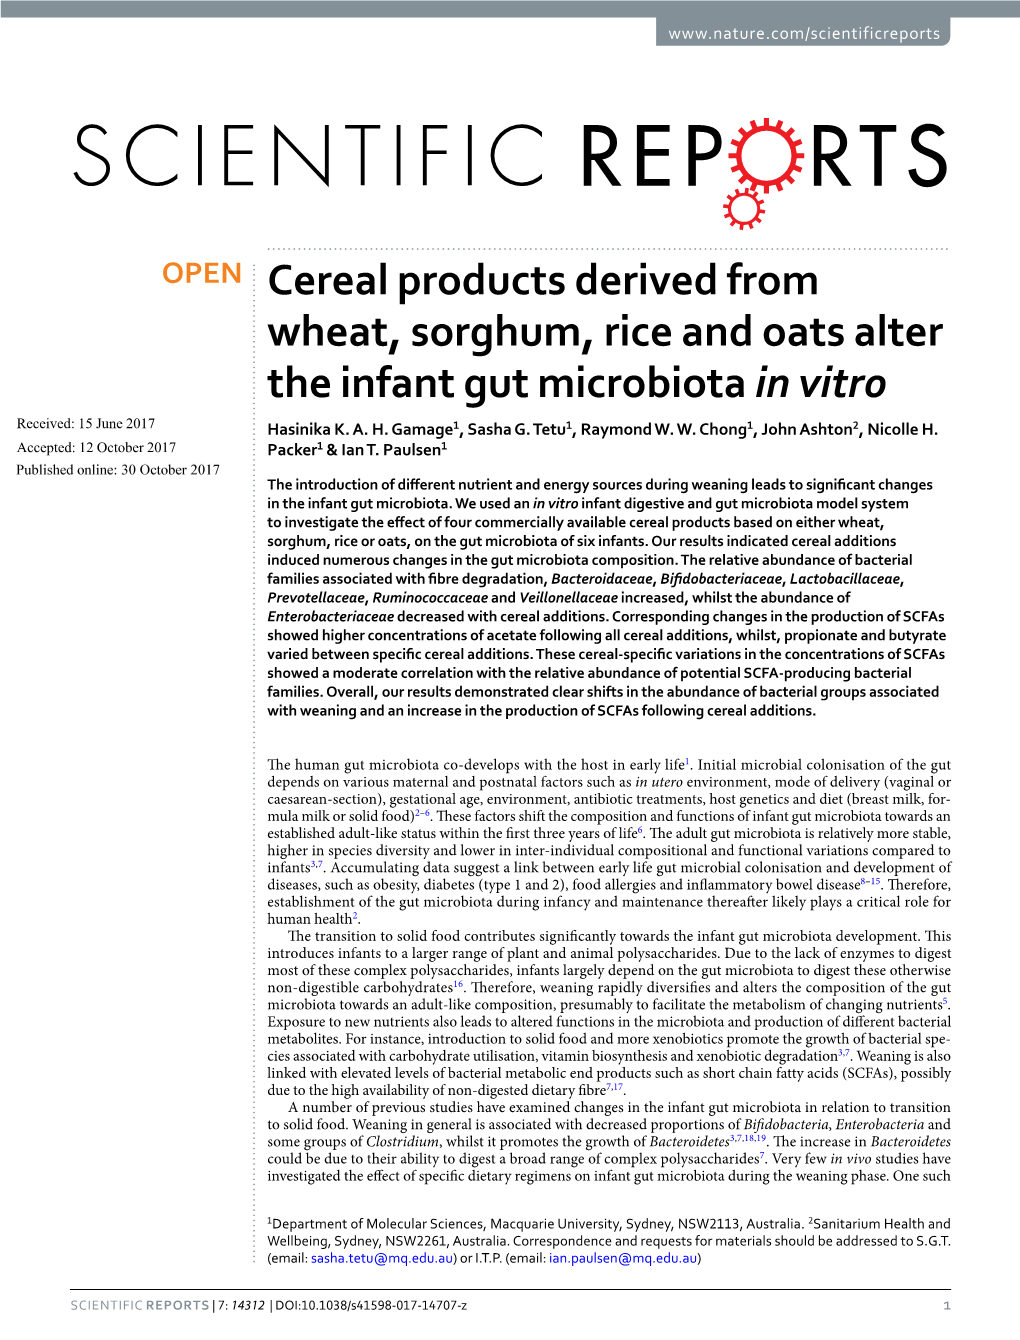 Cereal Products Derived from Wheat, Sorghum, Rice and Oats Alter the Infant Gut Microbiota in Vitro Received: 15 June 2017 Hasinika K